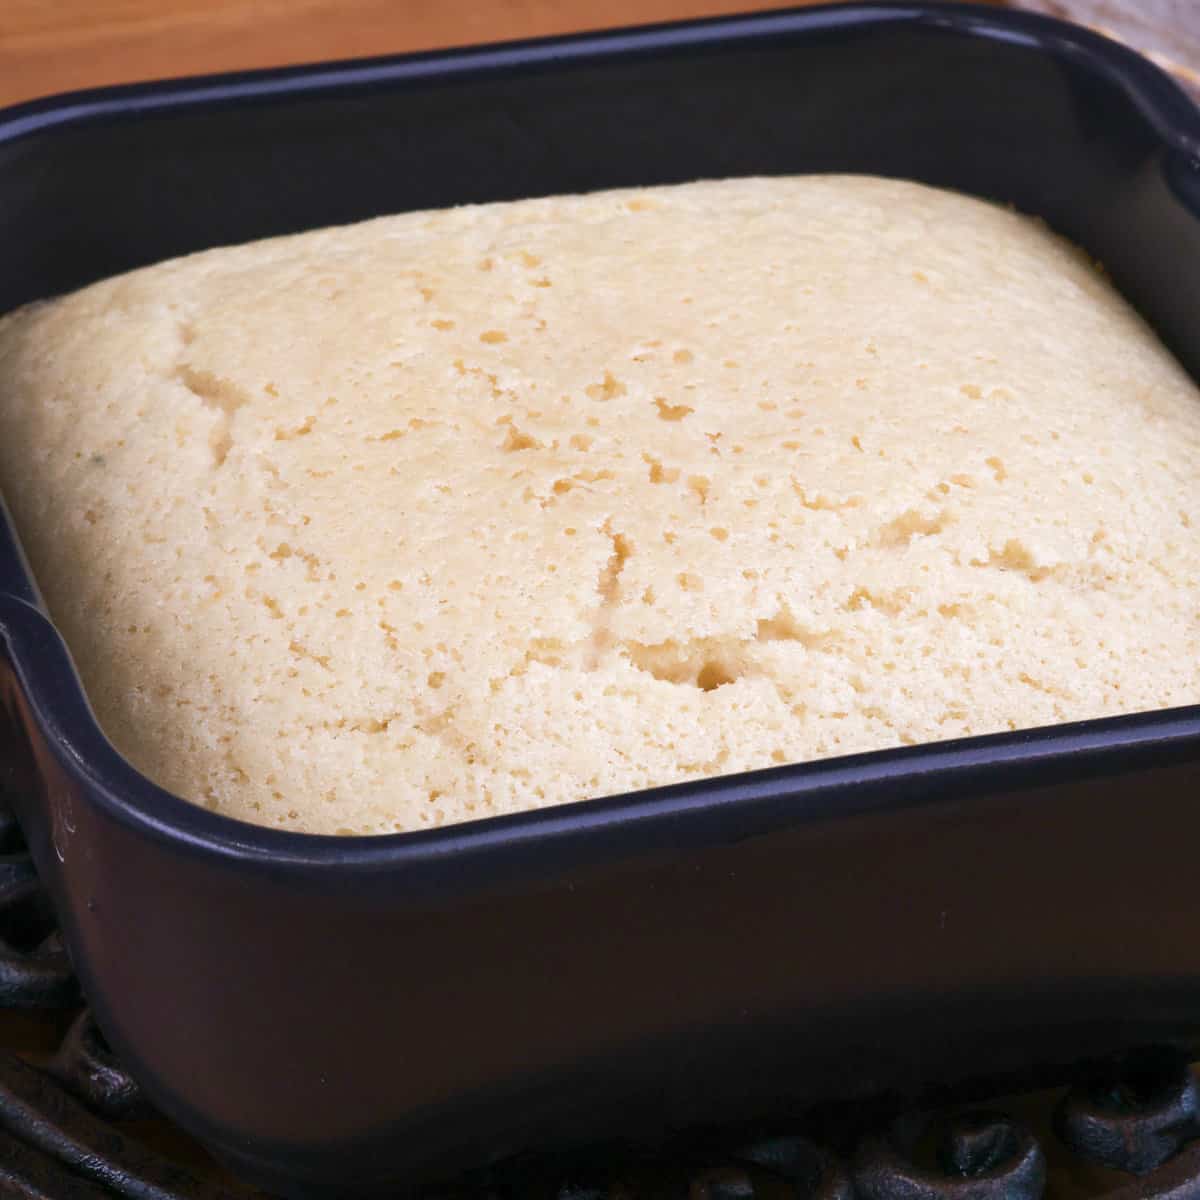 a white cake in a small black baking dish